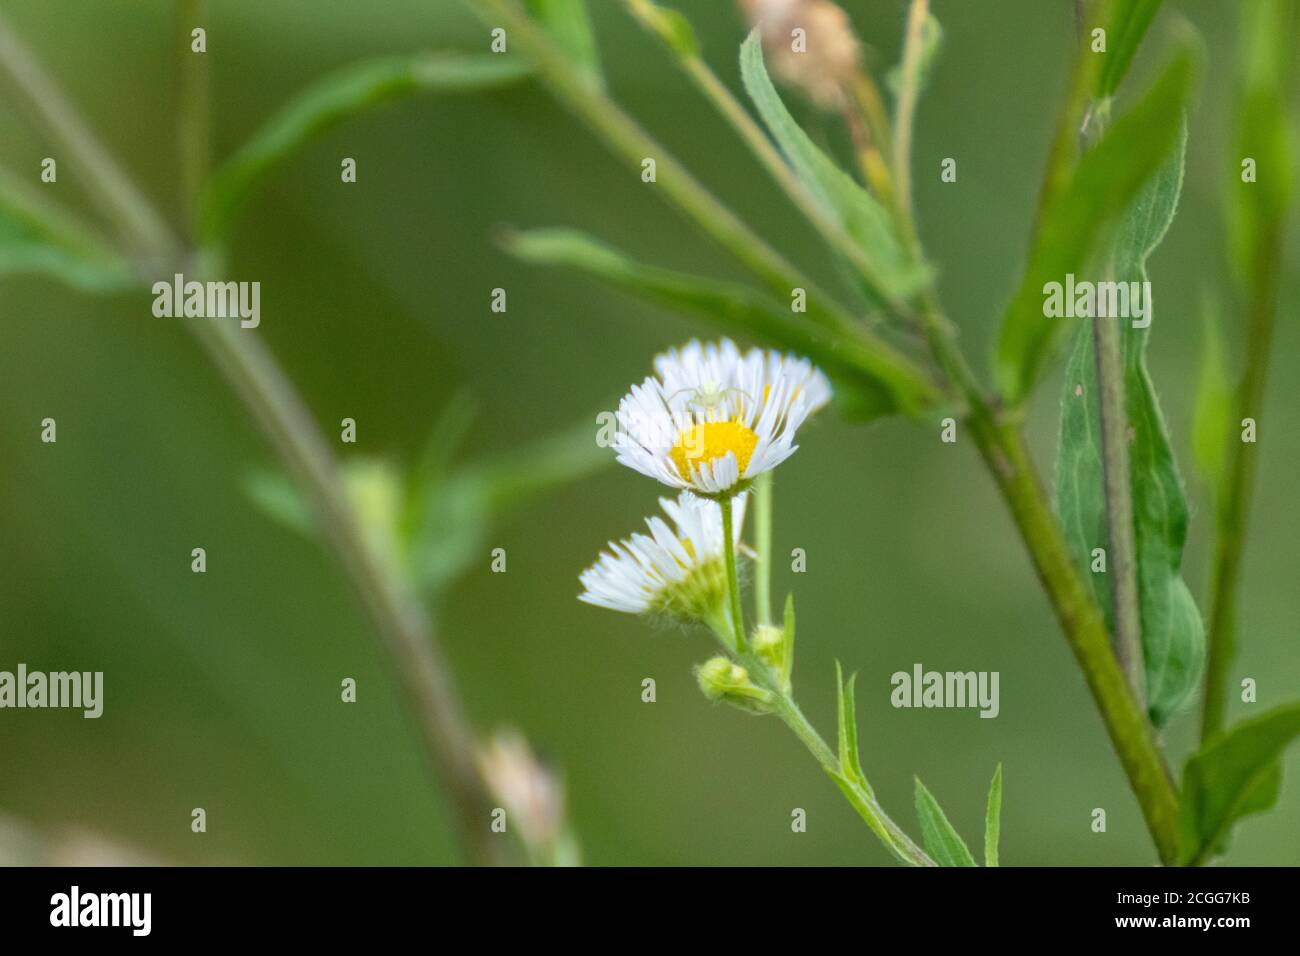 Tiny white wild daisy like flowers in wild natural grass field in green blurred environment background. Erigeron strigosus Stock Photo